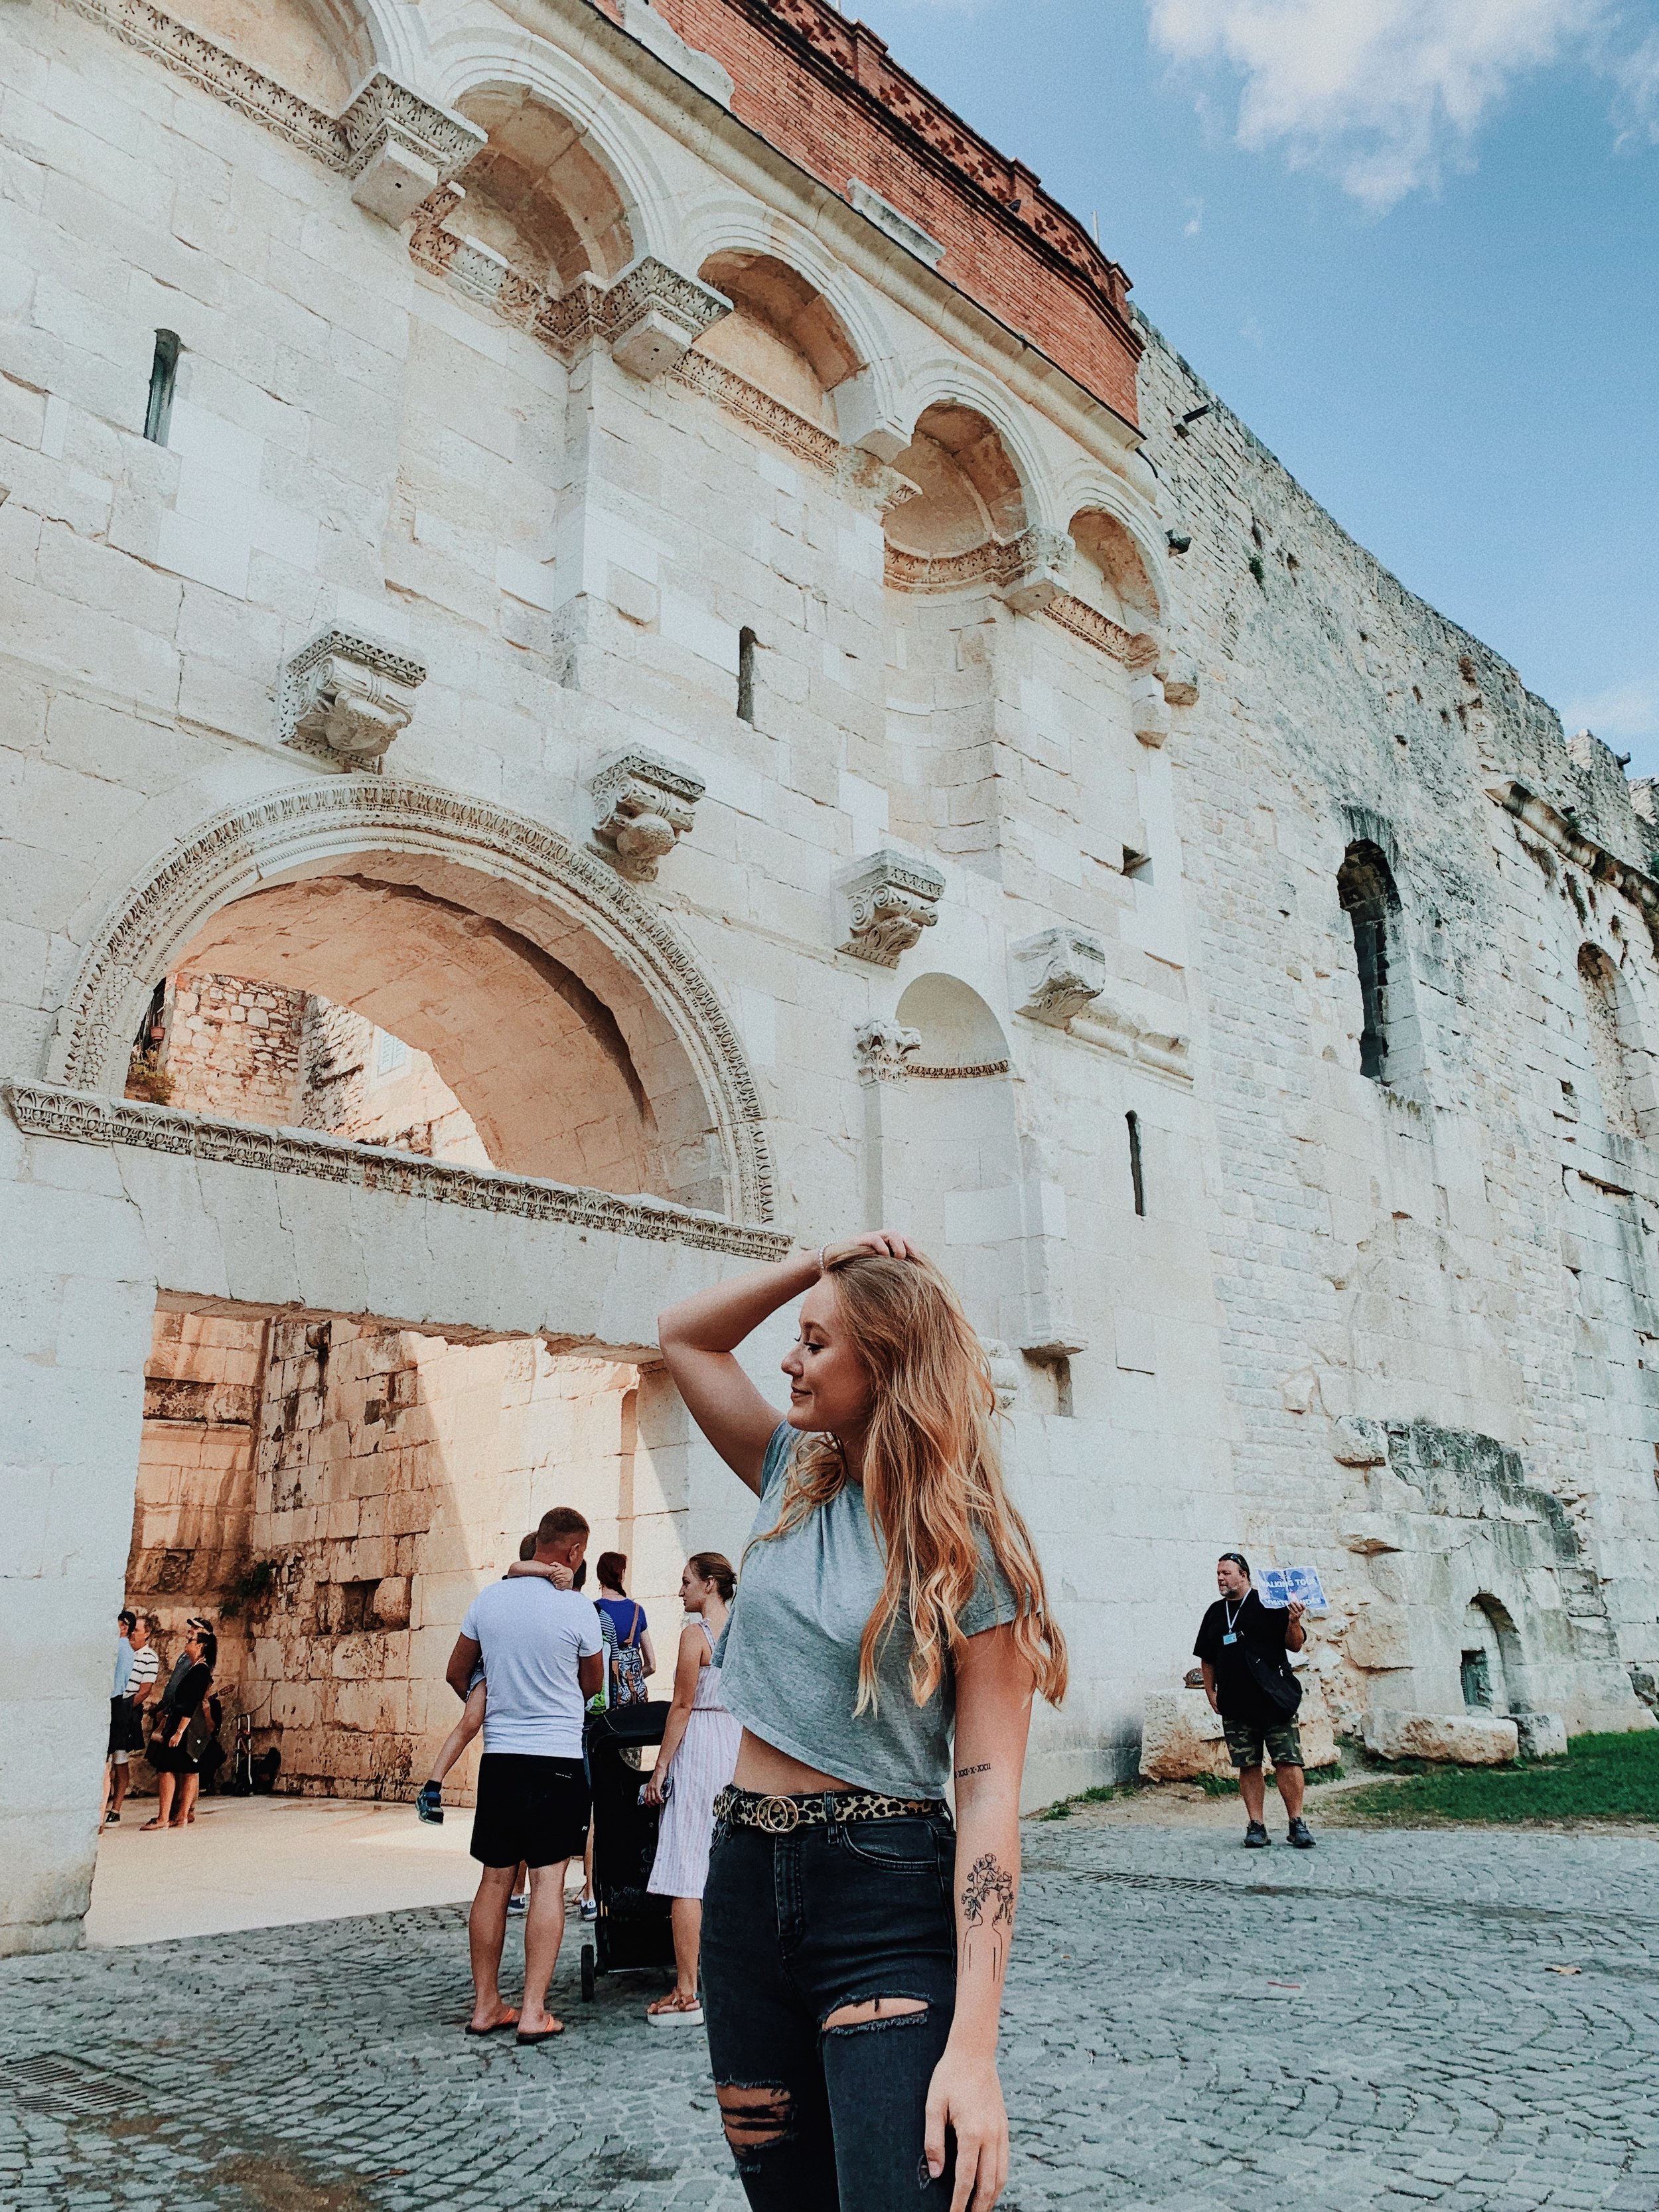 top 7 things to do in Split, Croatia: a 2 day itinerary for Split, Croatia